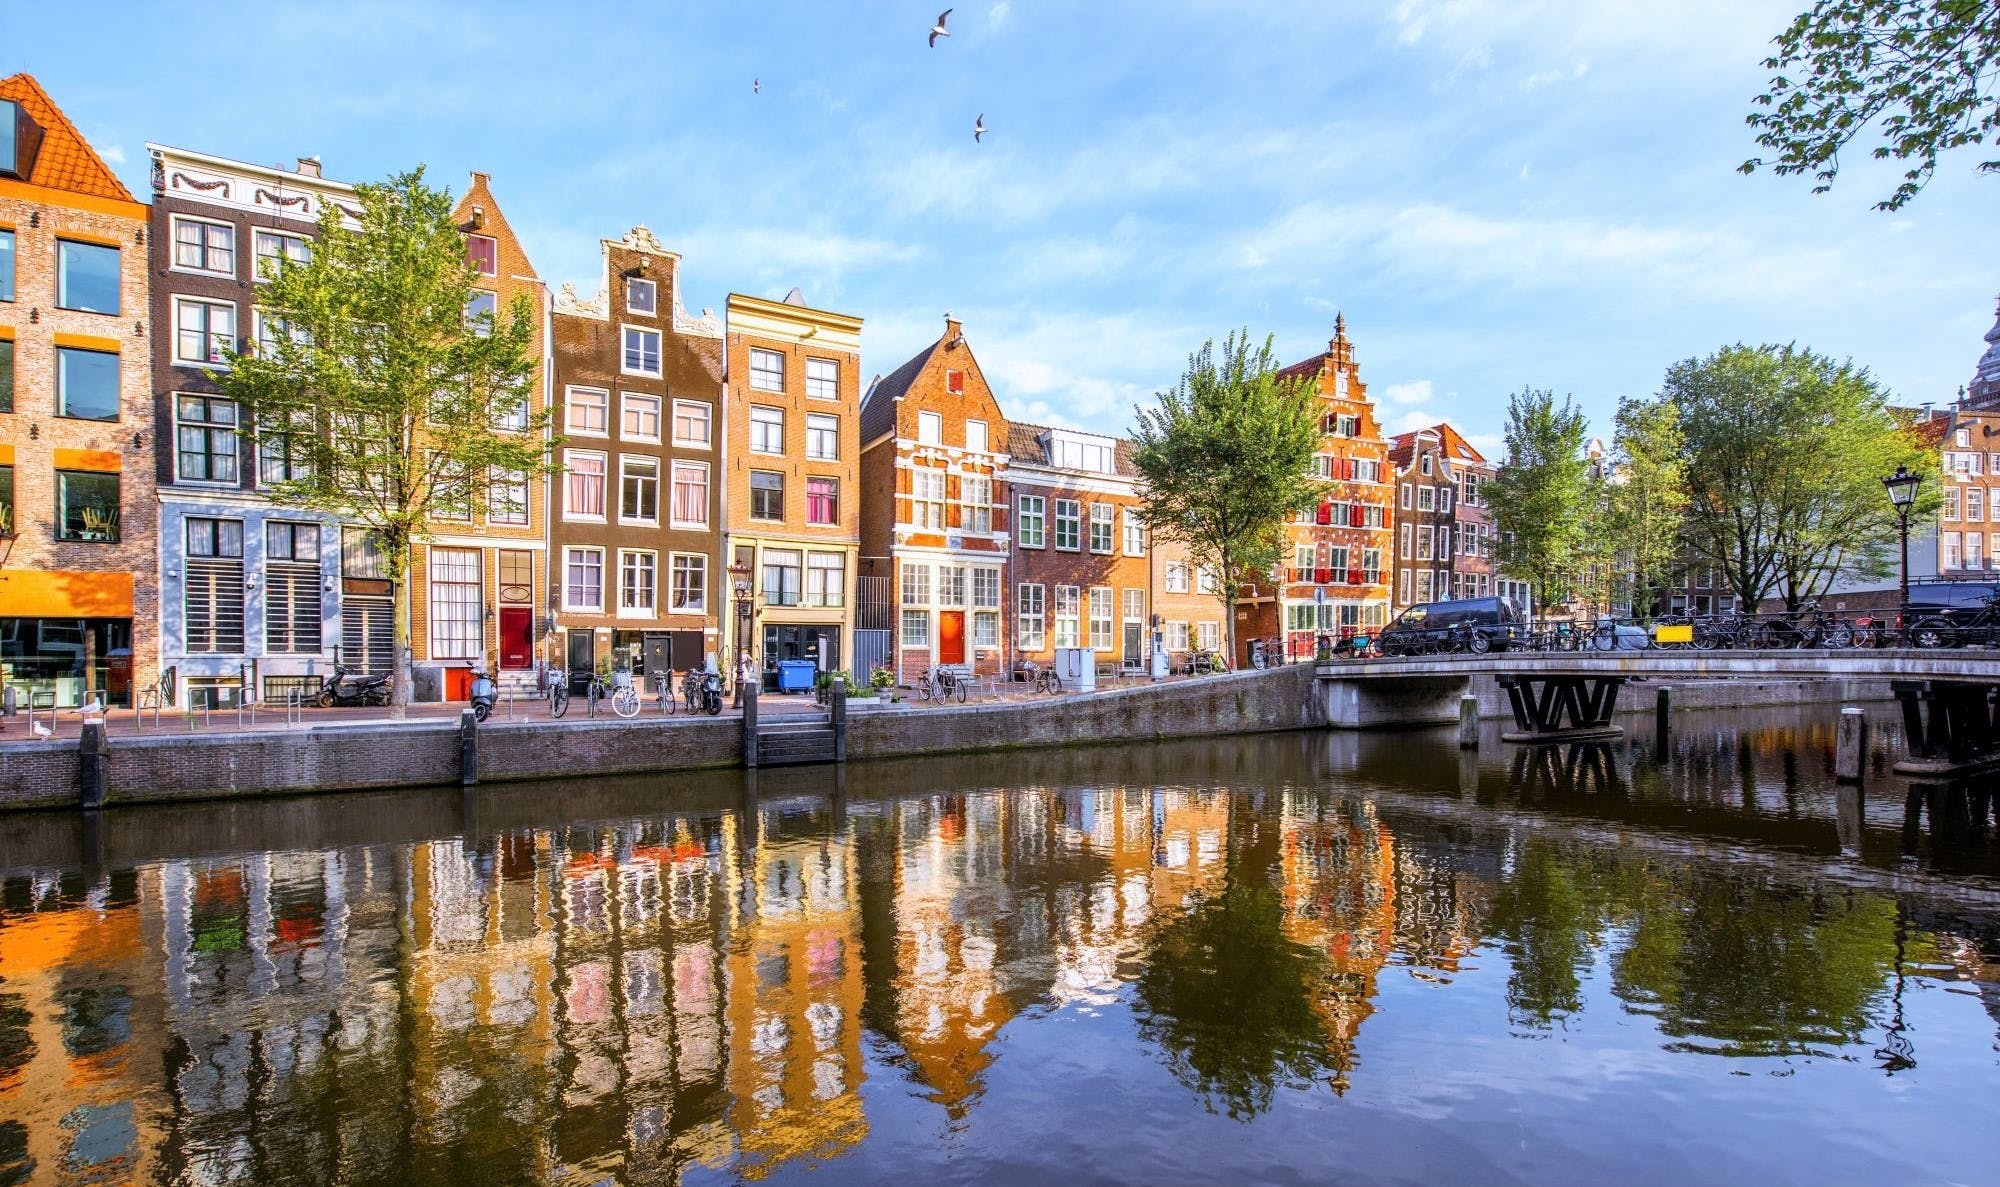 Amsterdam travel guide for first-time visitors - Best Places to Visit in Europe - planningforeurope.com (1)